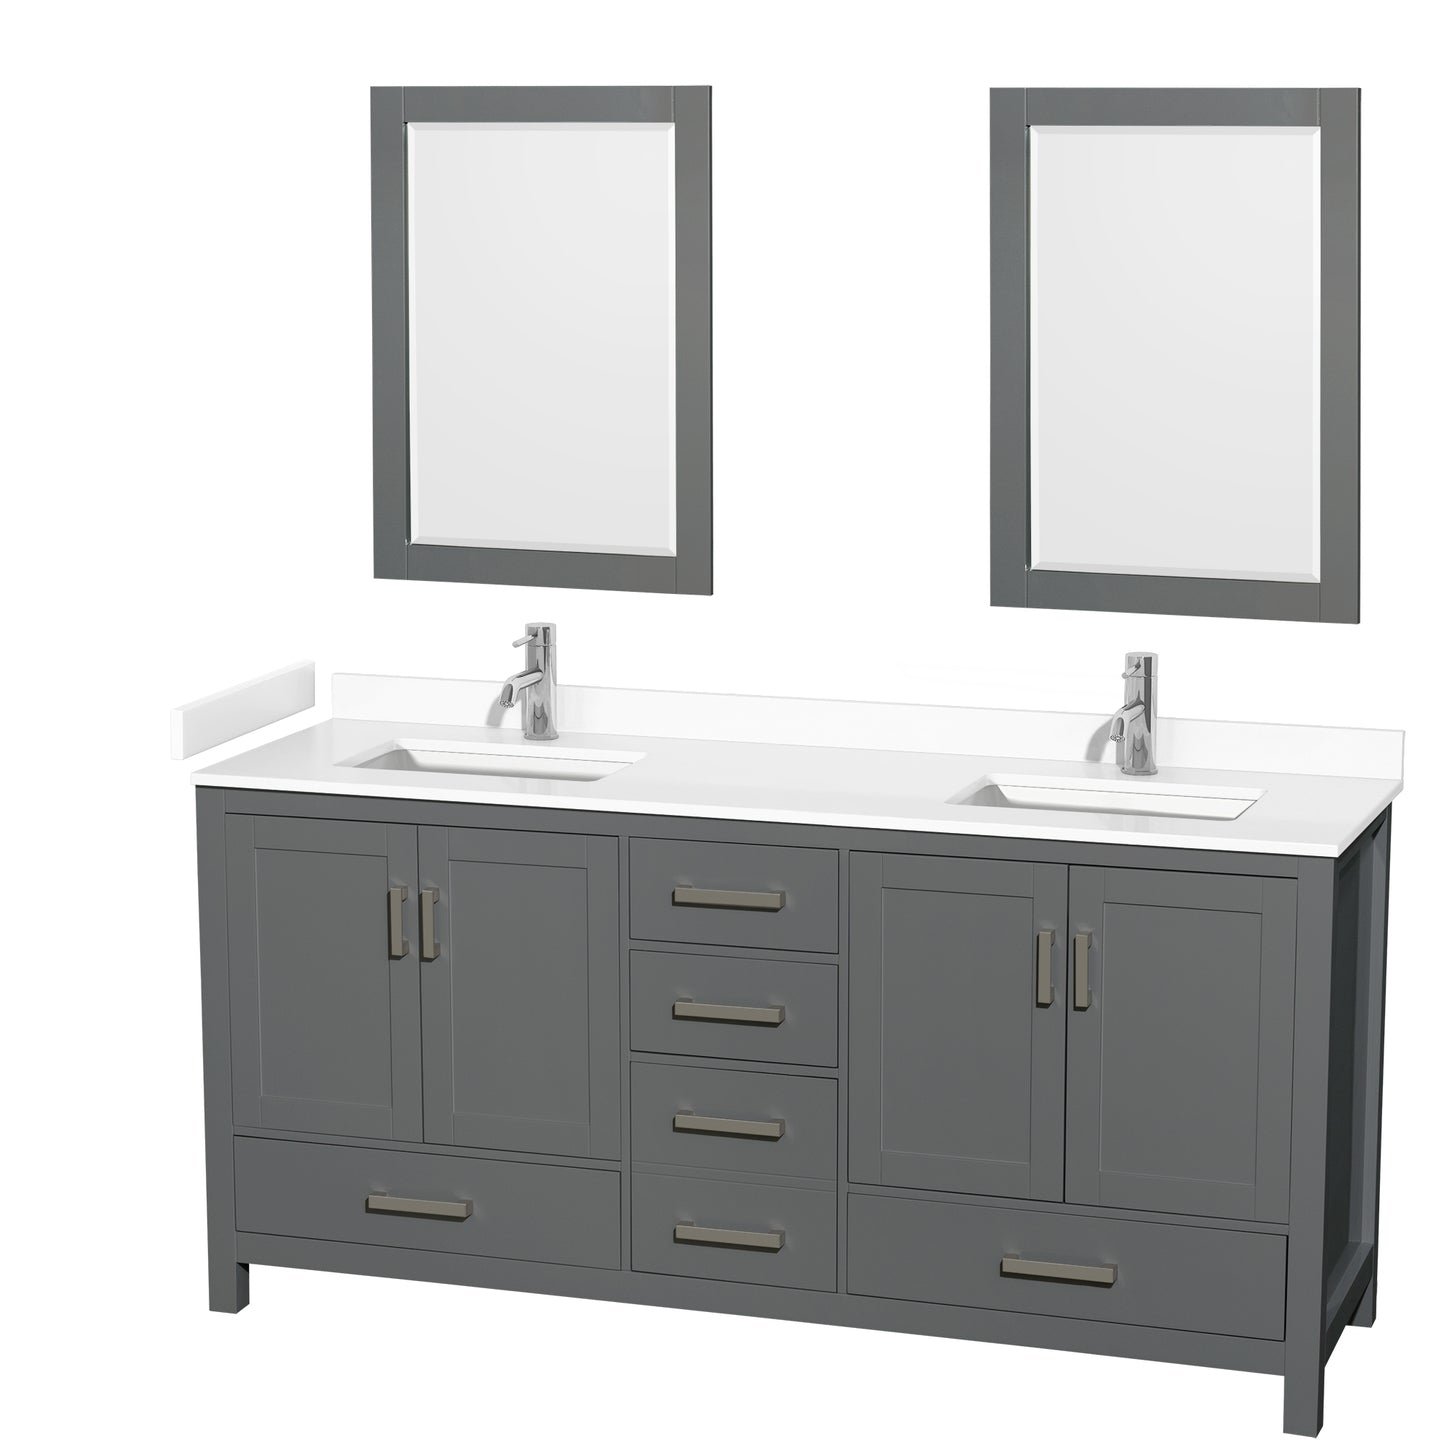 Wyndham Collection Sheffield 72 Inch Double Bathroom Vanity in Dark Gray, Marble Countertop, Undermount Square Sinks, 24 and 70 Inch Mirrors - Luxe Bathroom Vanities